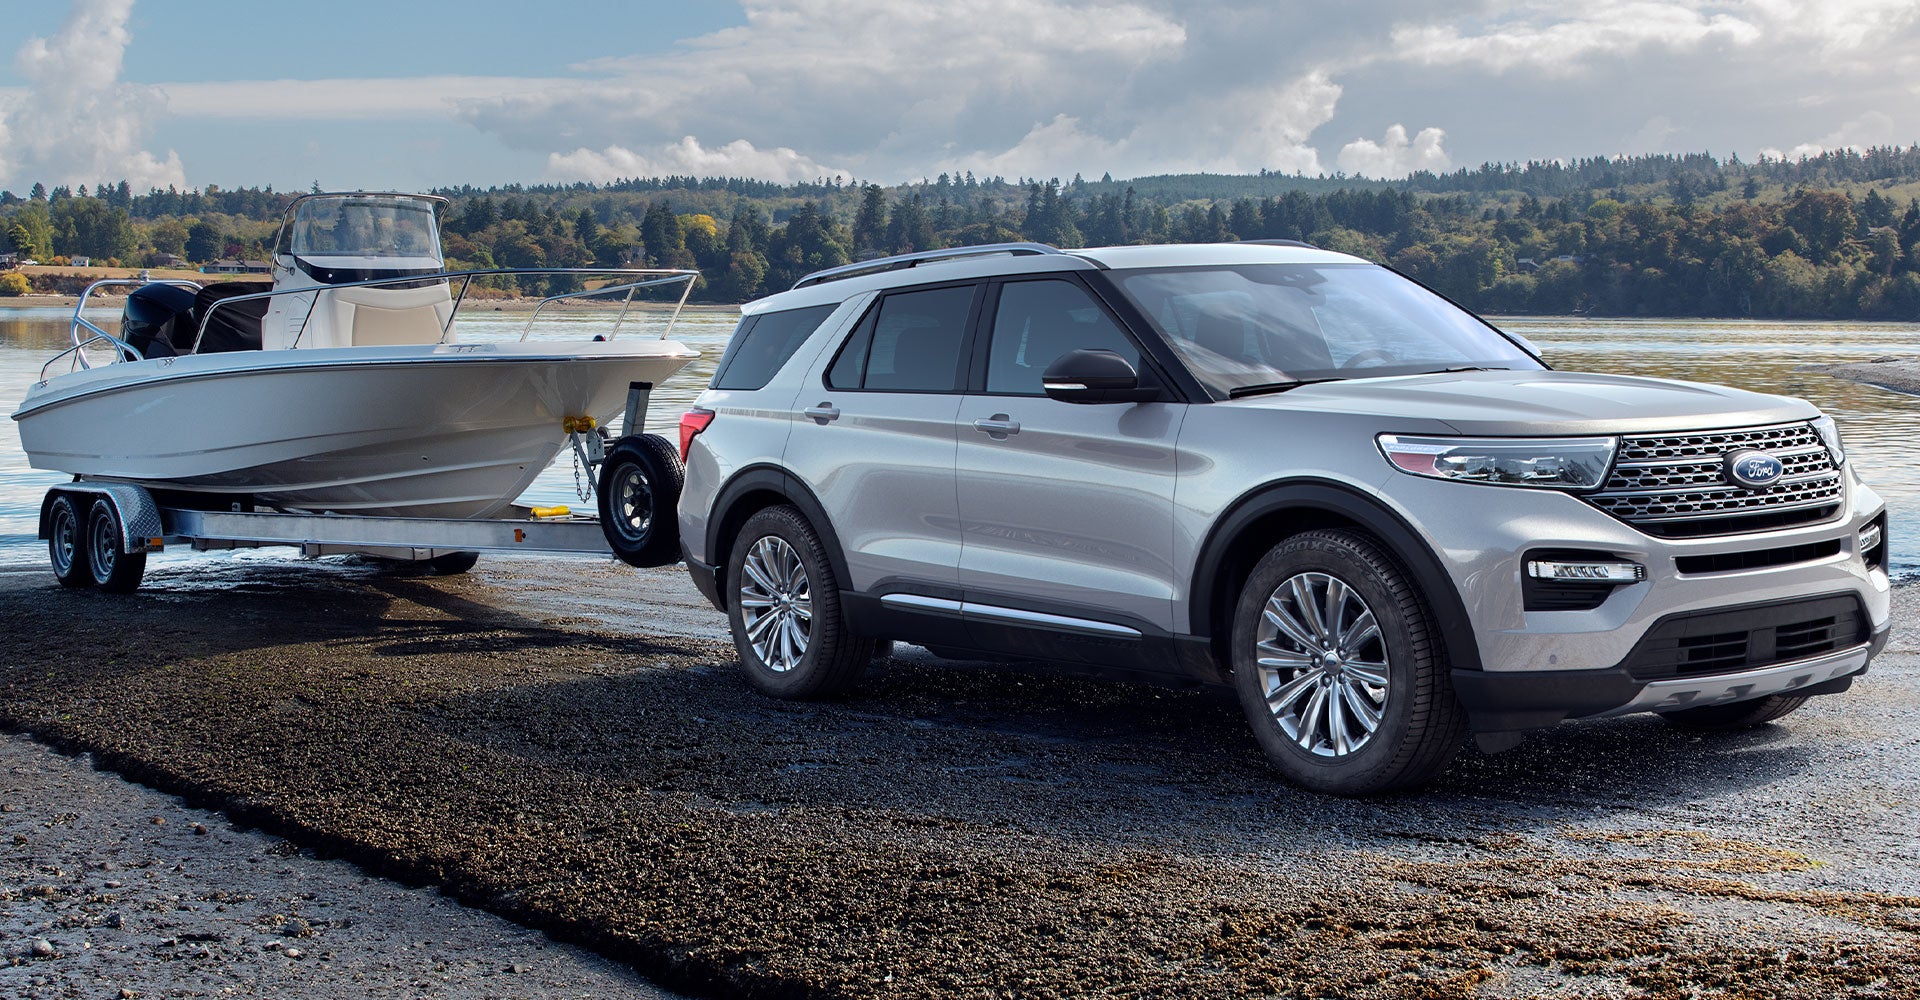 2022 Ford Explorer Towing Capacity